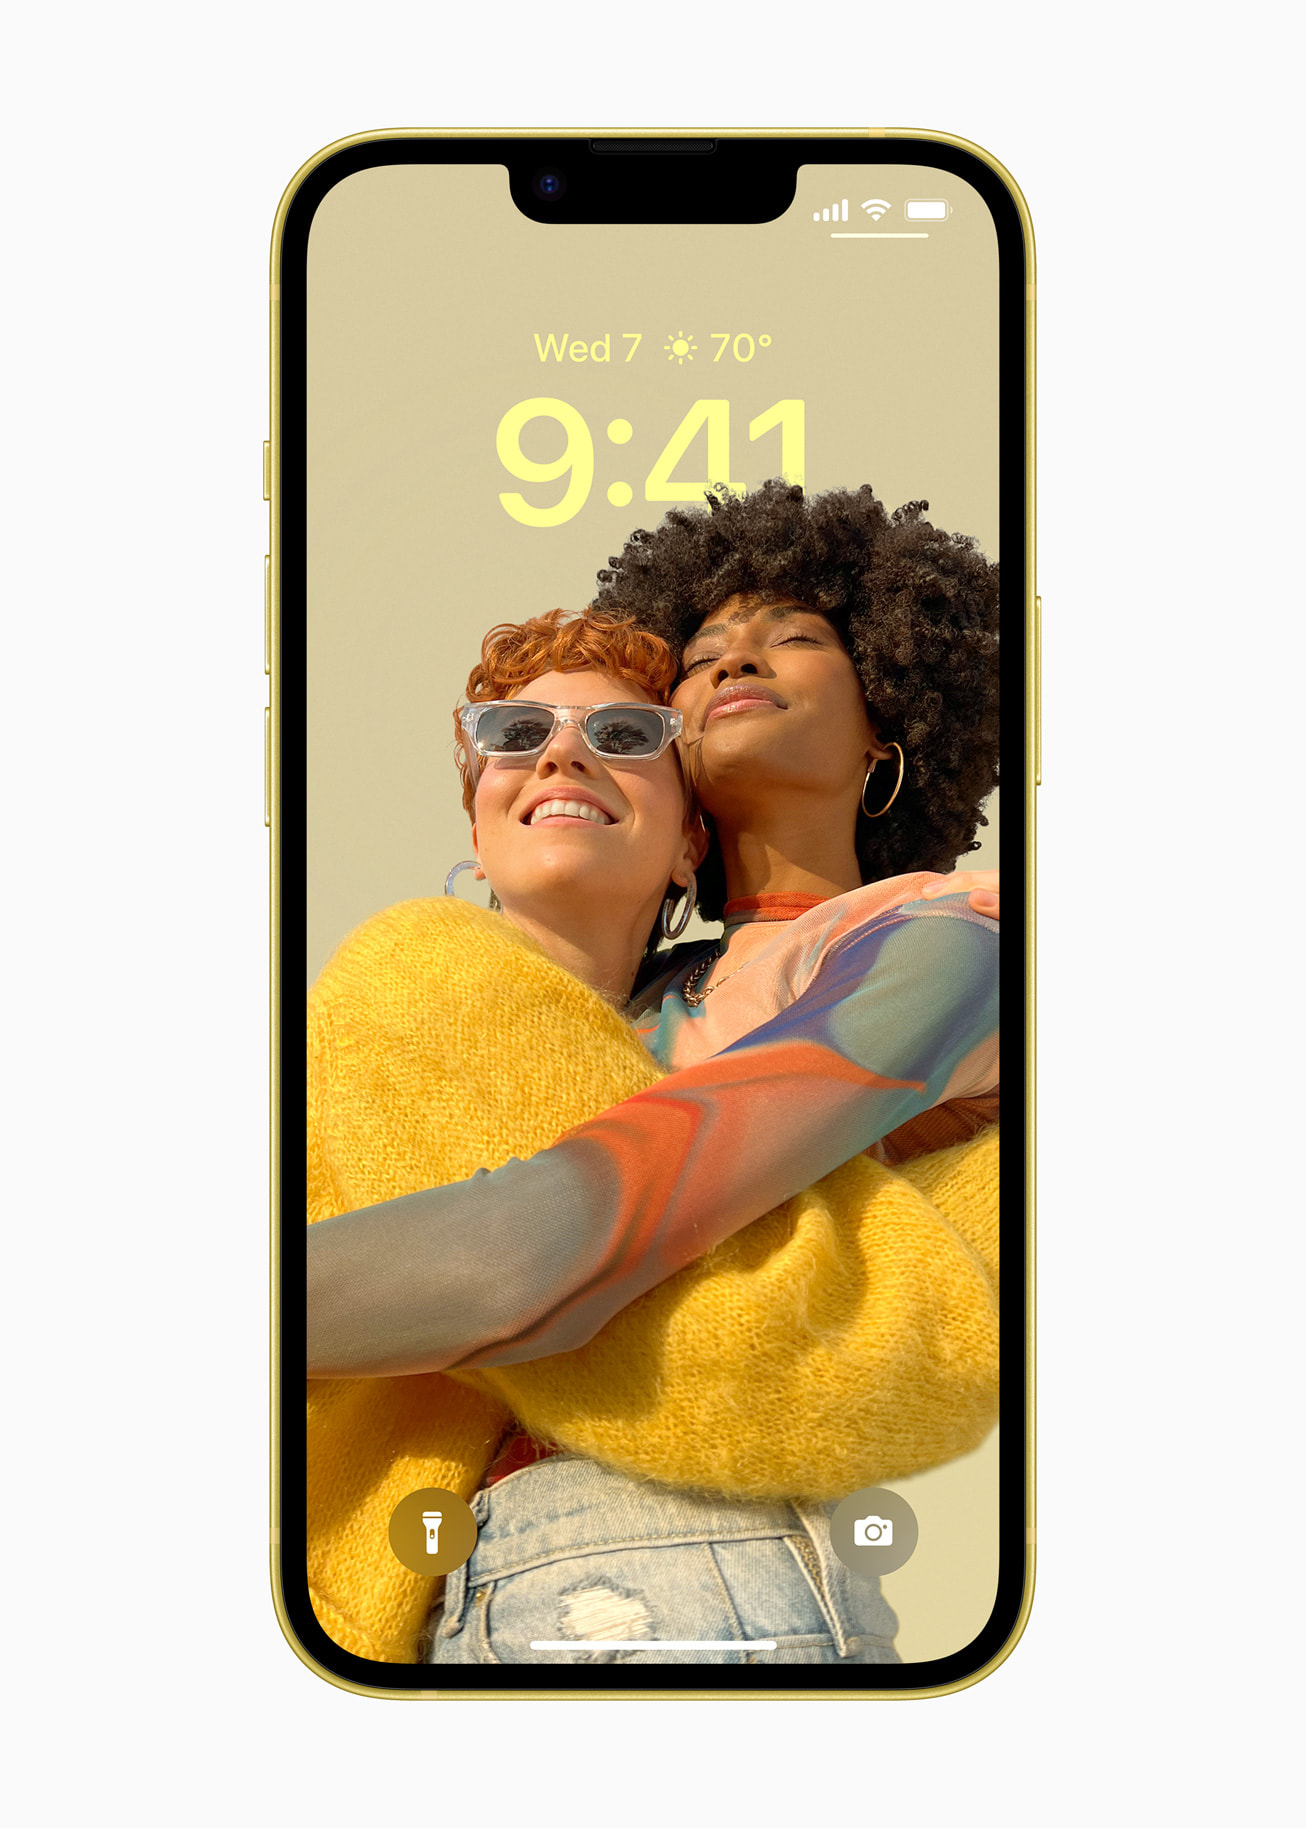 A personalized locked screen on the iPhone